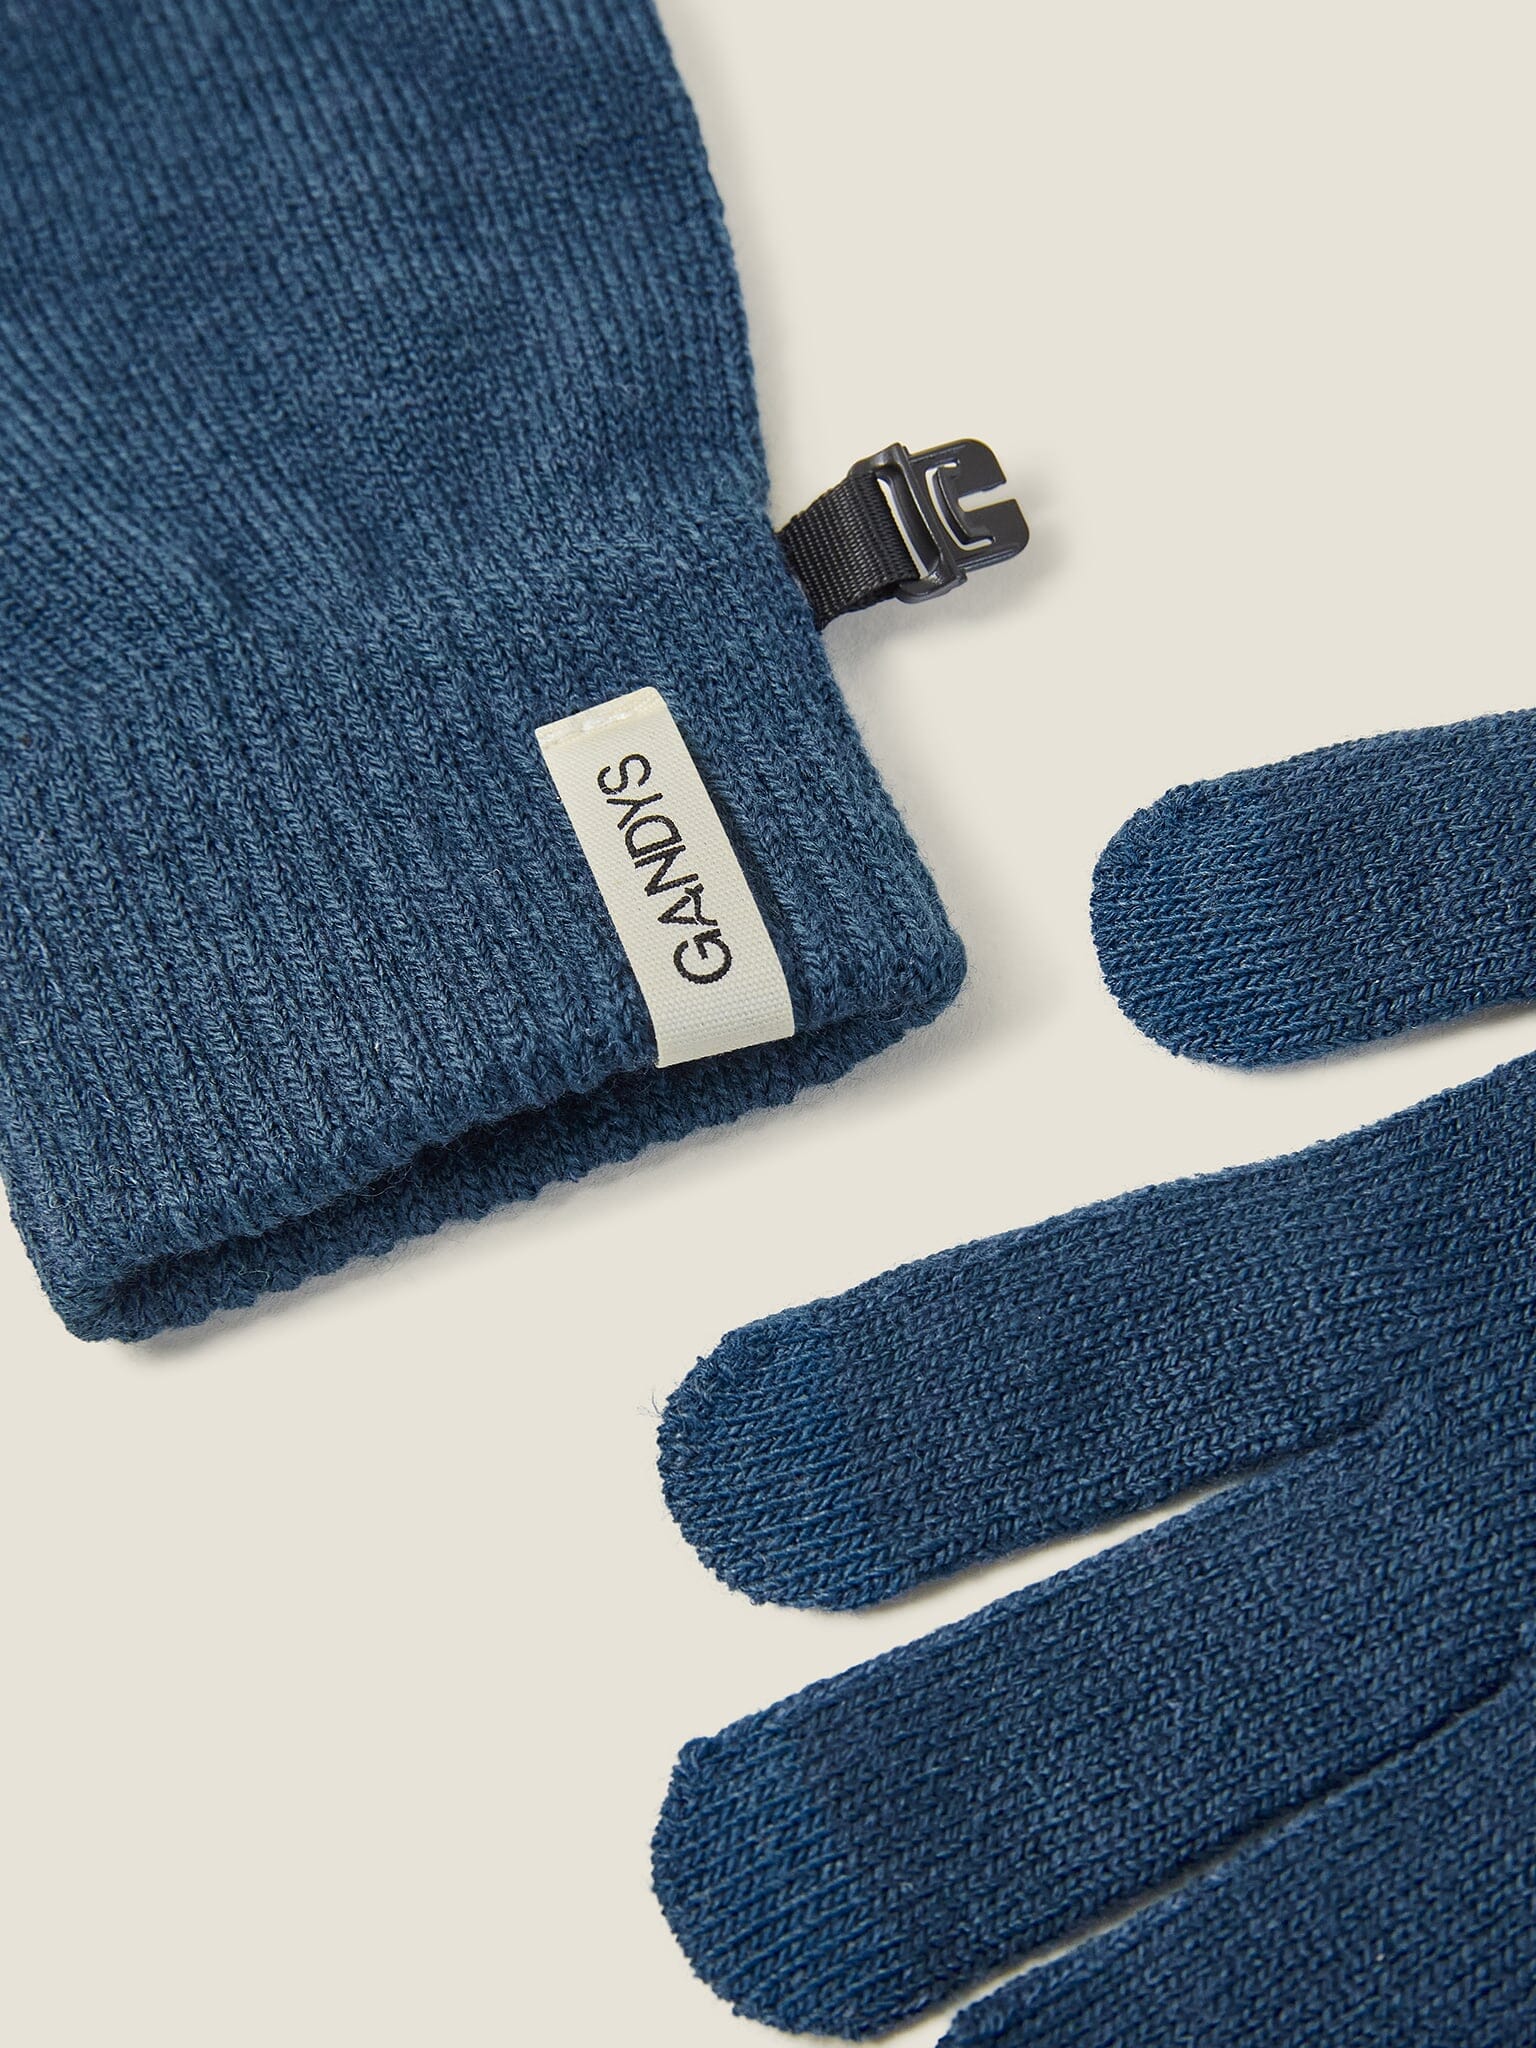 Teal Recycled Touch Screen Gloves